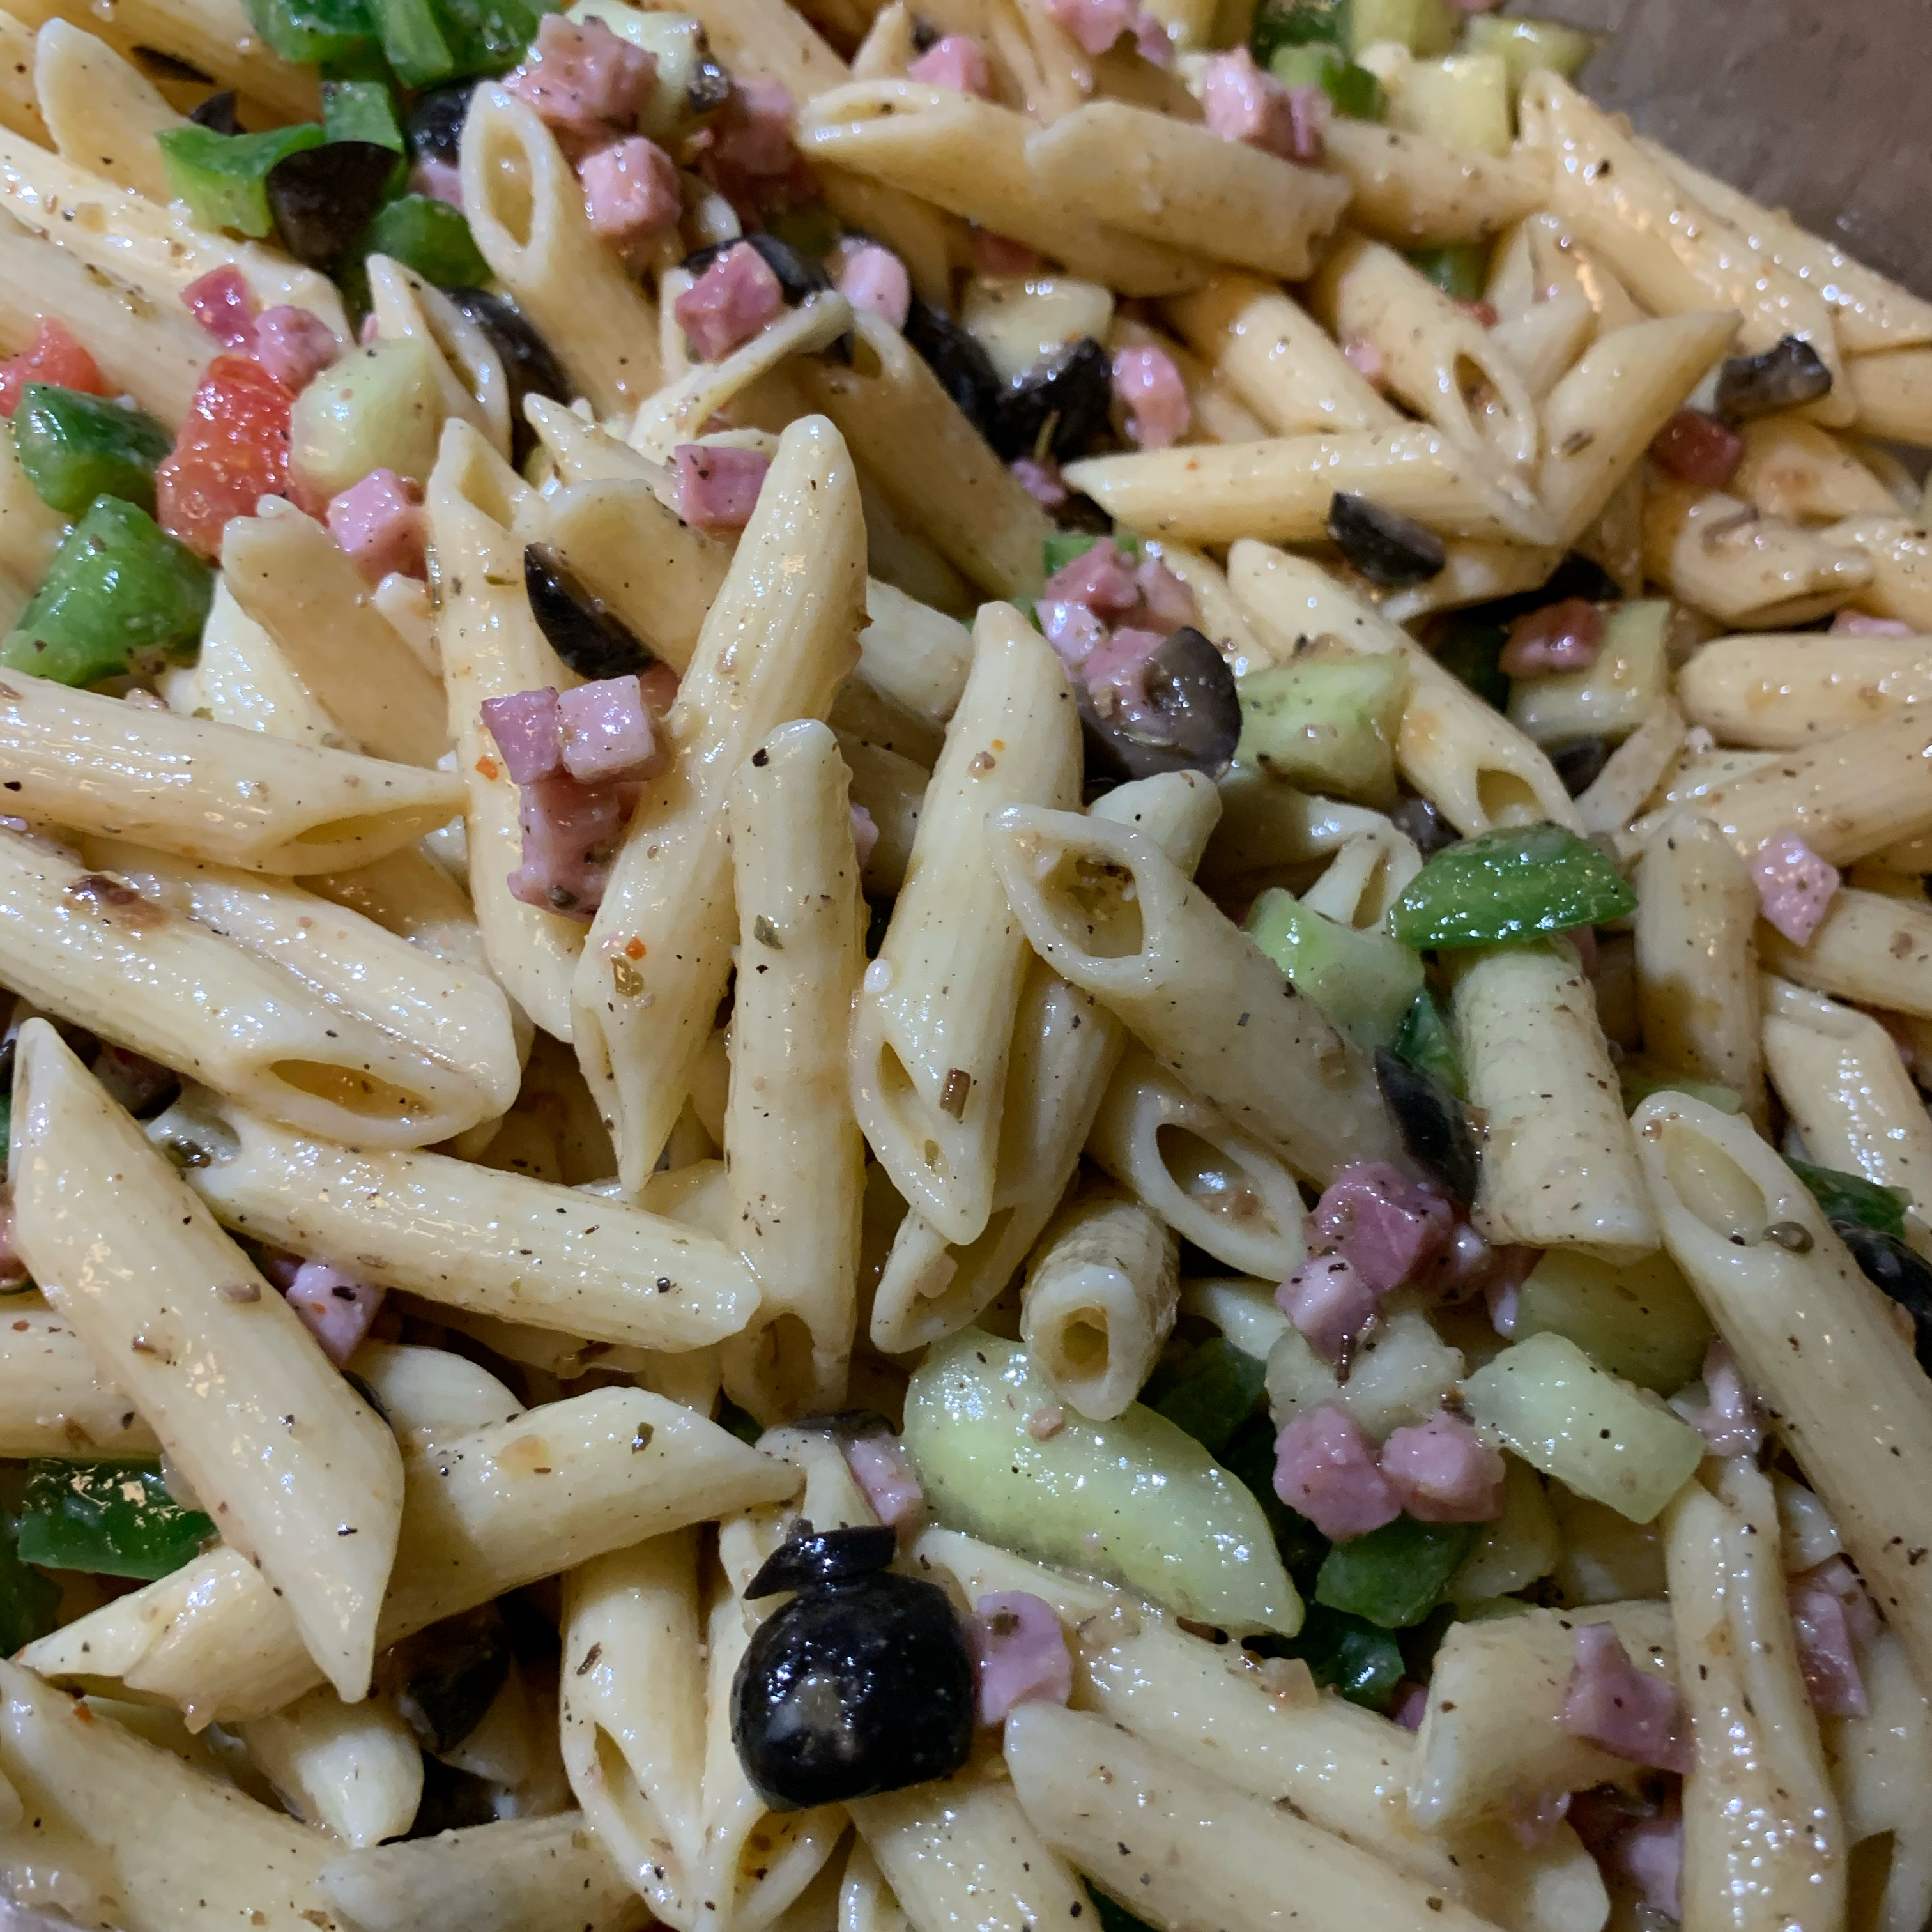 Awesome Pasta Salad 